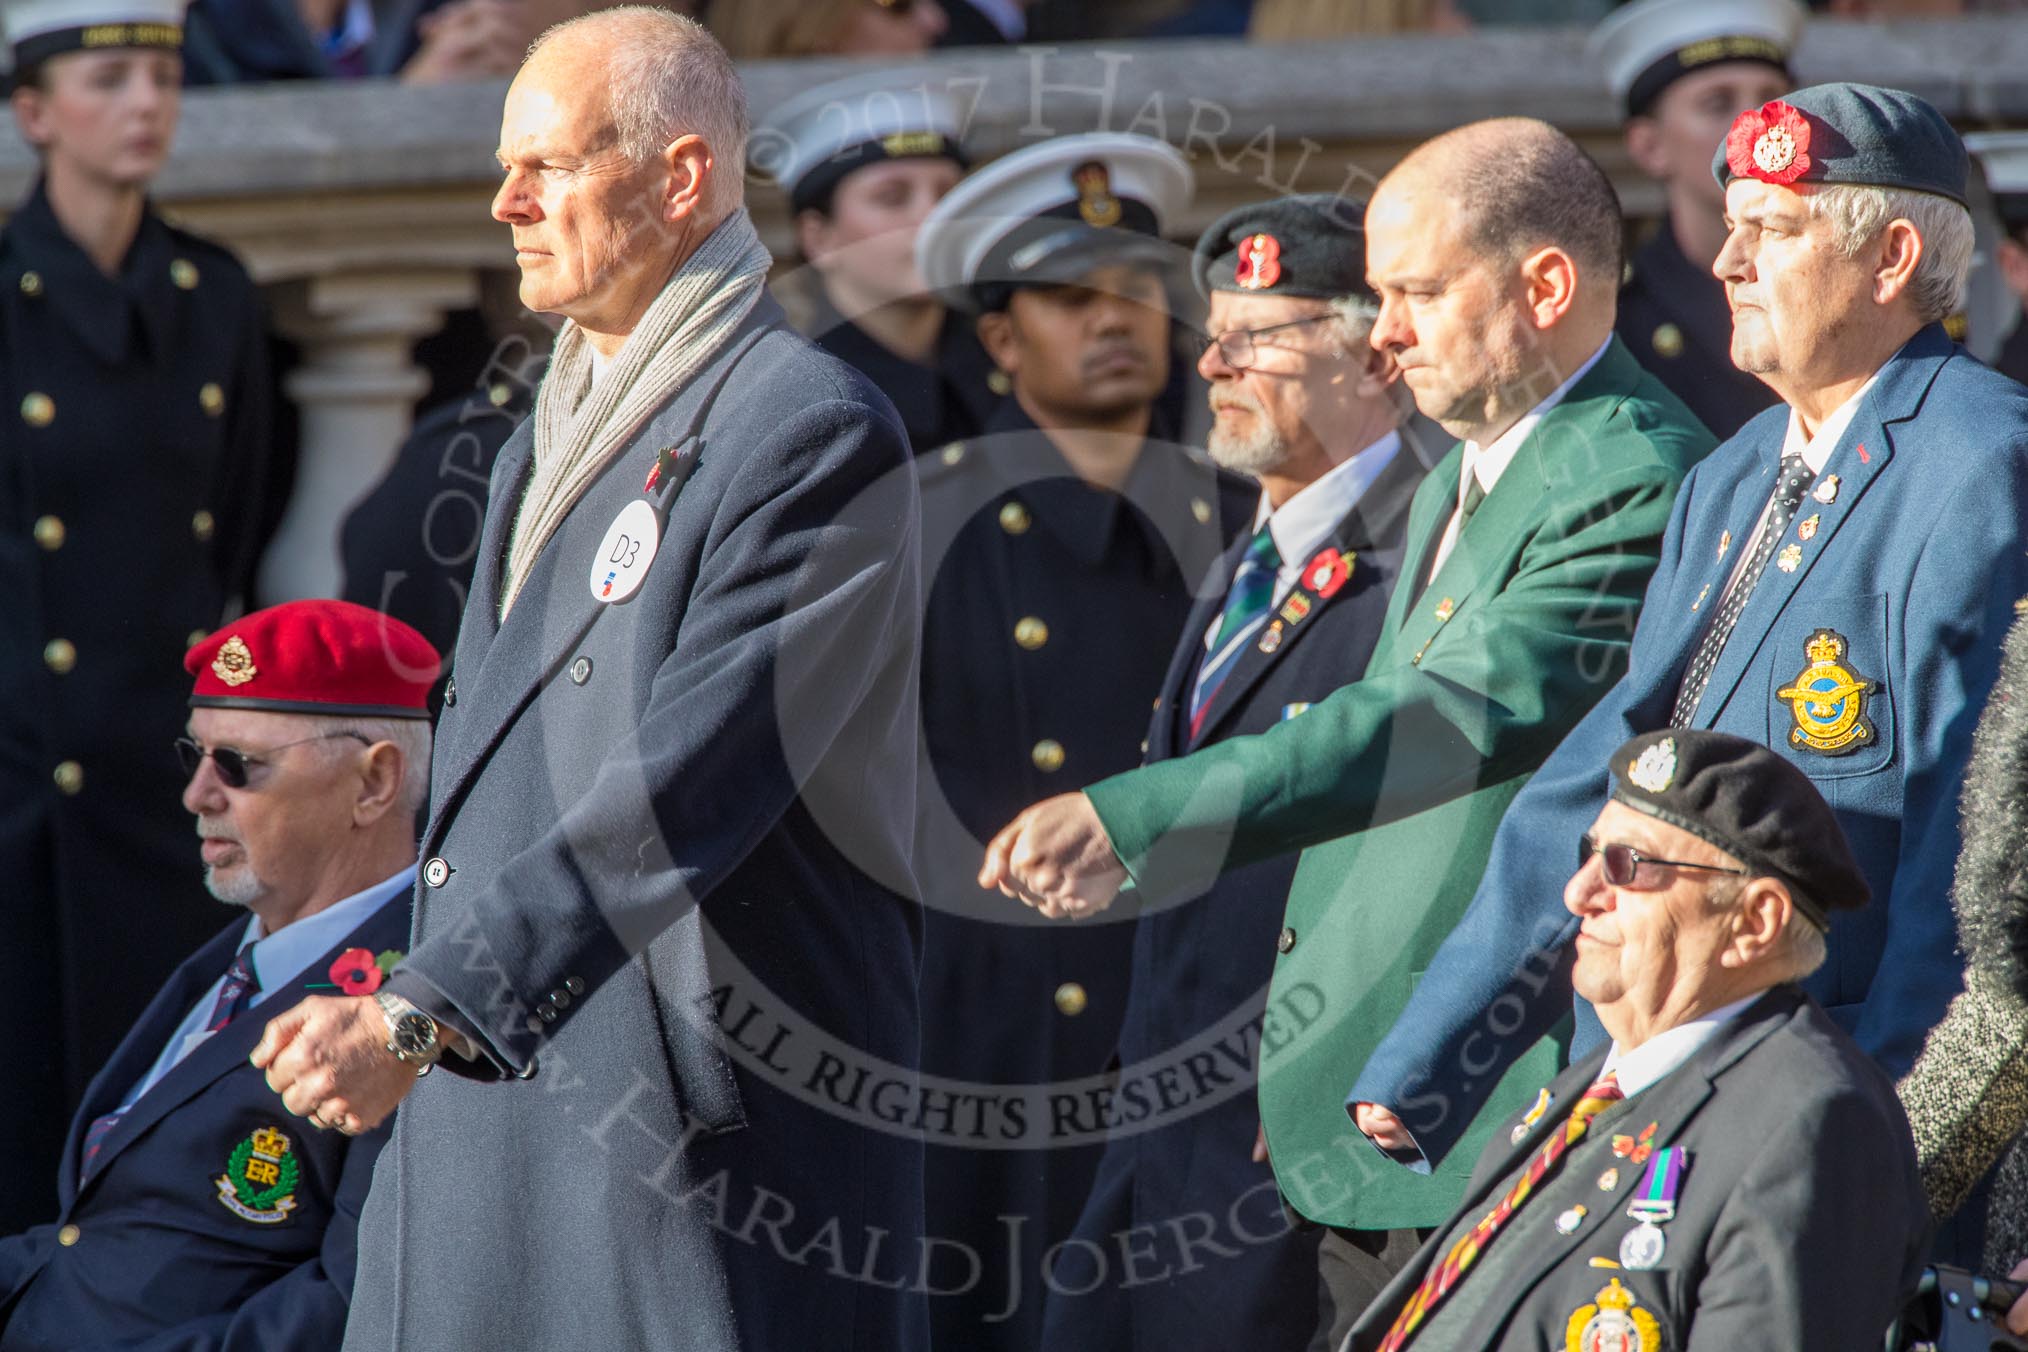 Stoll (Group D3, 18 members) during the Royal British Legion March Past on Remembrance Sunday at the Cenotaph, Whitehall, Westminster, London, 11 November 2018, 12:20.